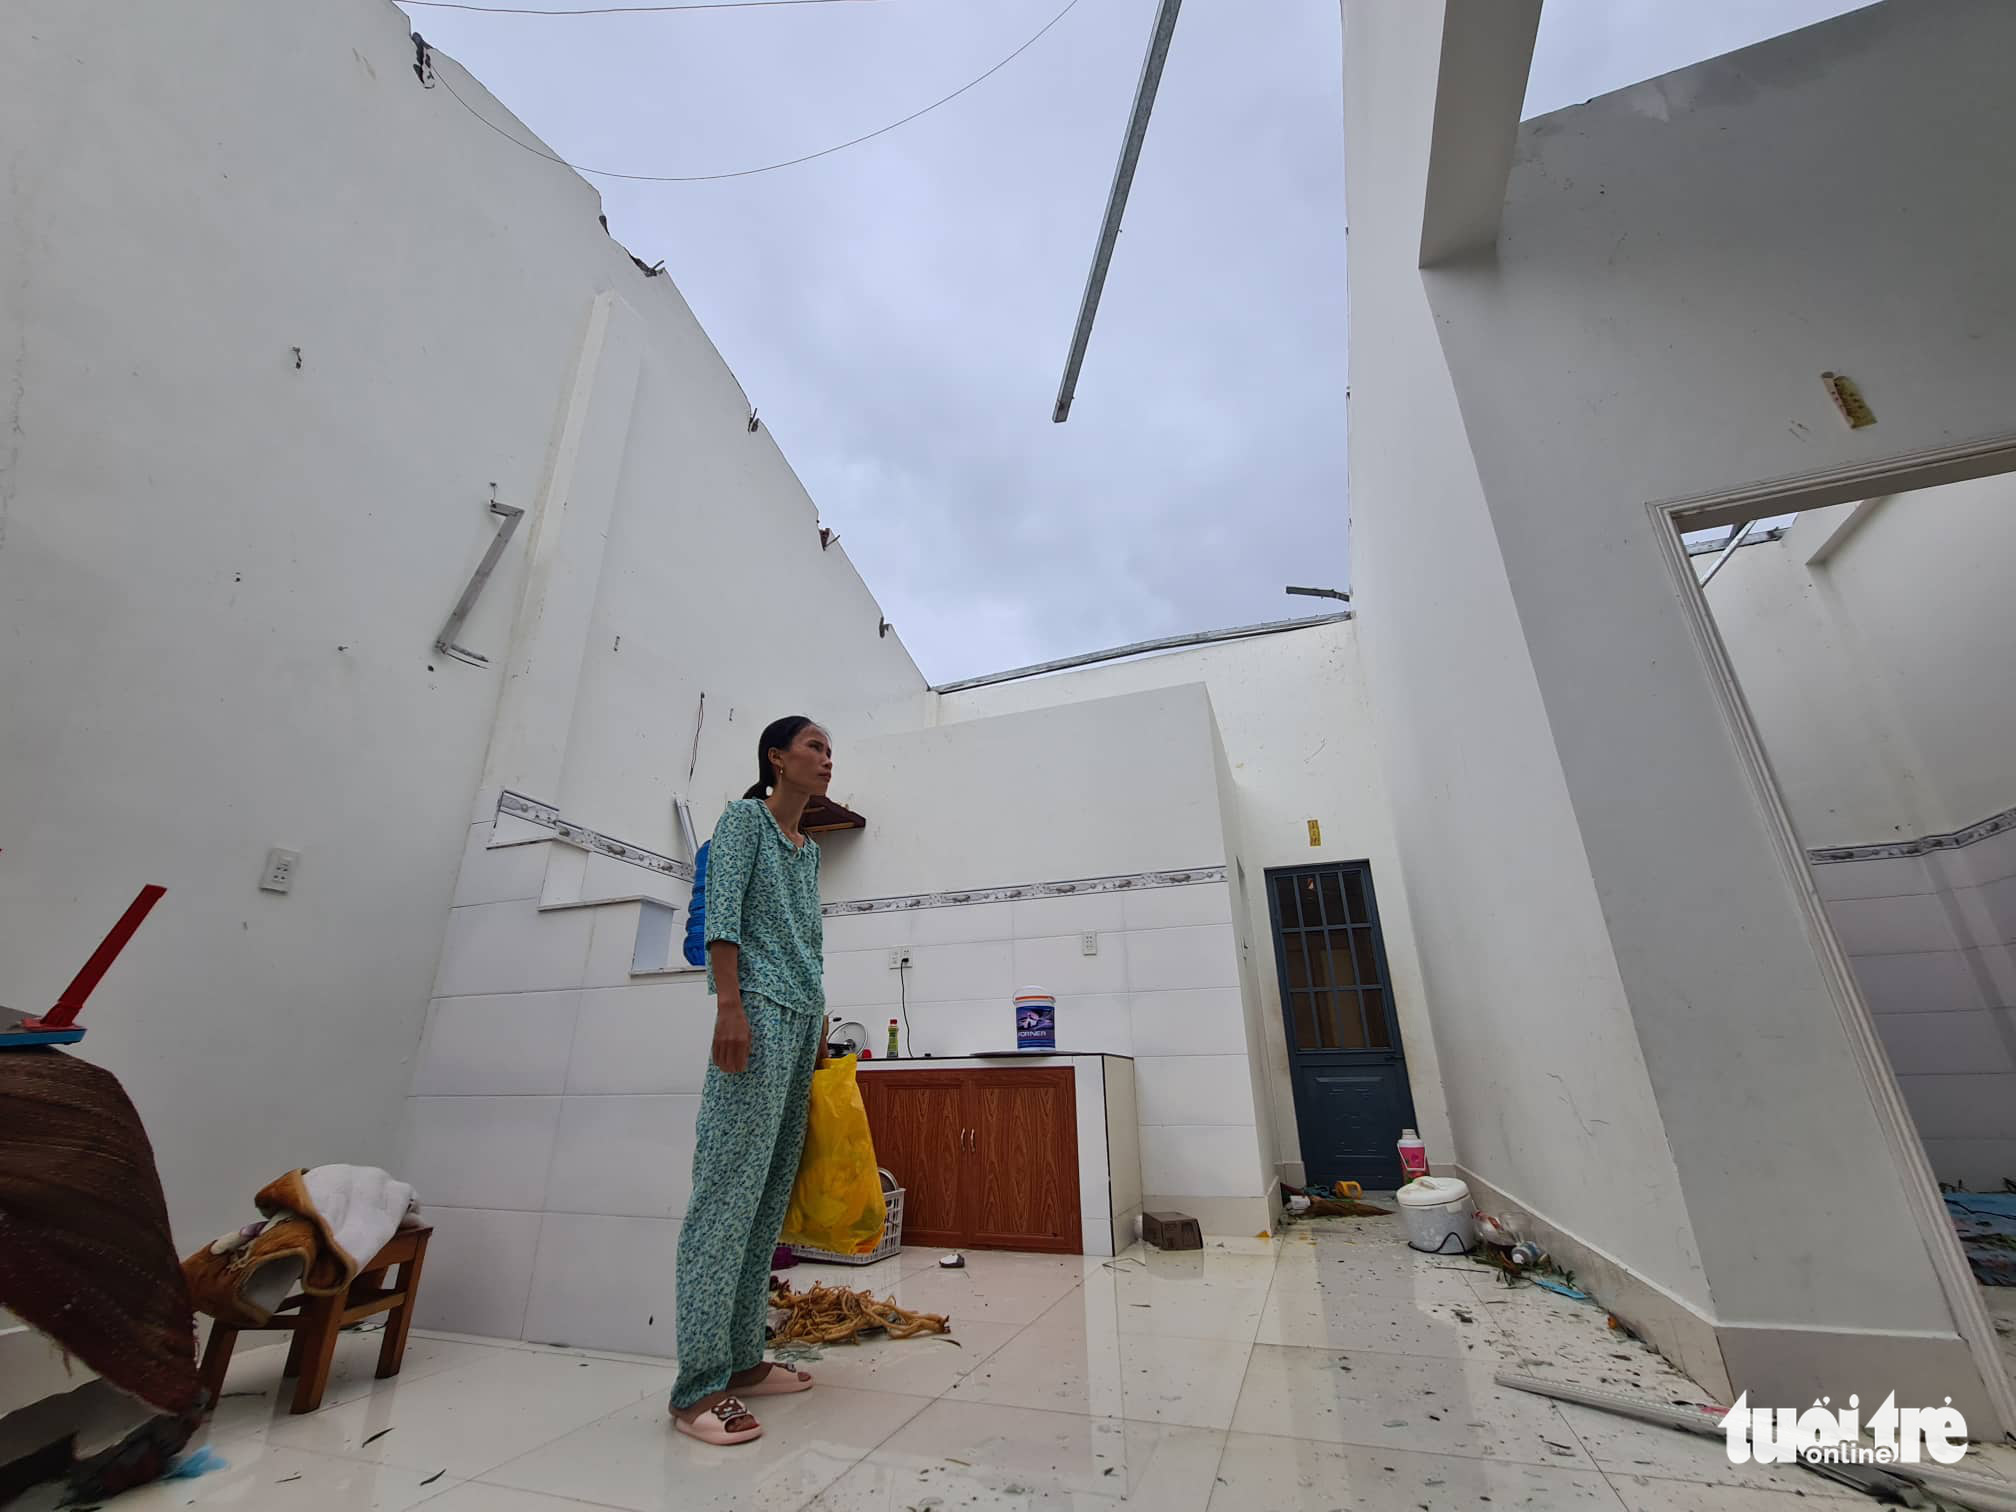 A house has its roof blown away in Thua Thien-Hue Province, Vietnam, September 28, 2022. Photo: Van Linh / Tuoi Tre